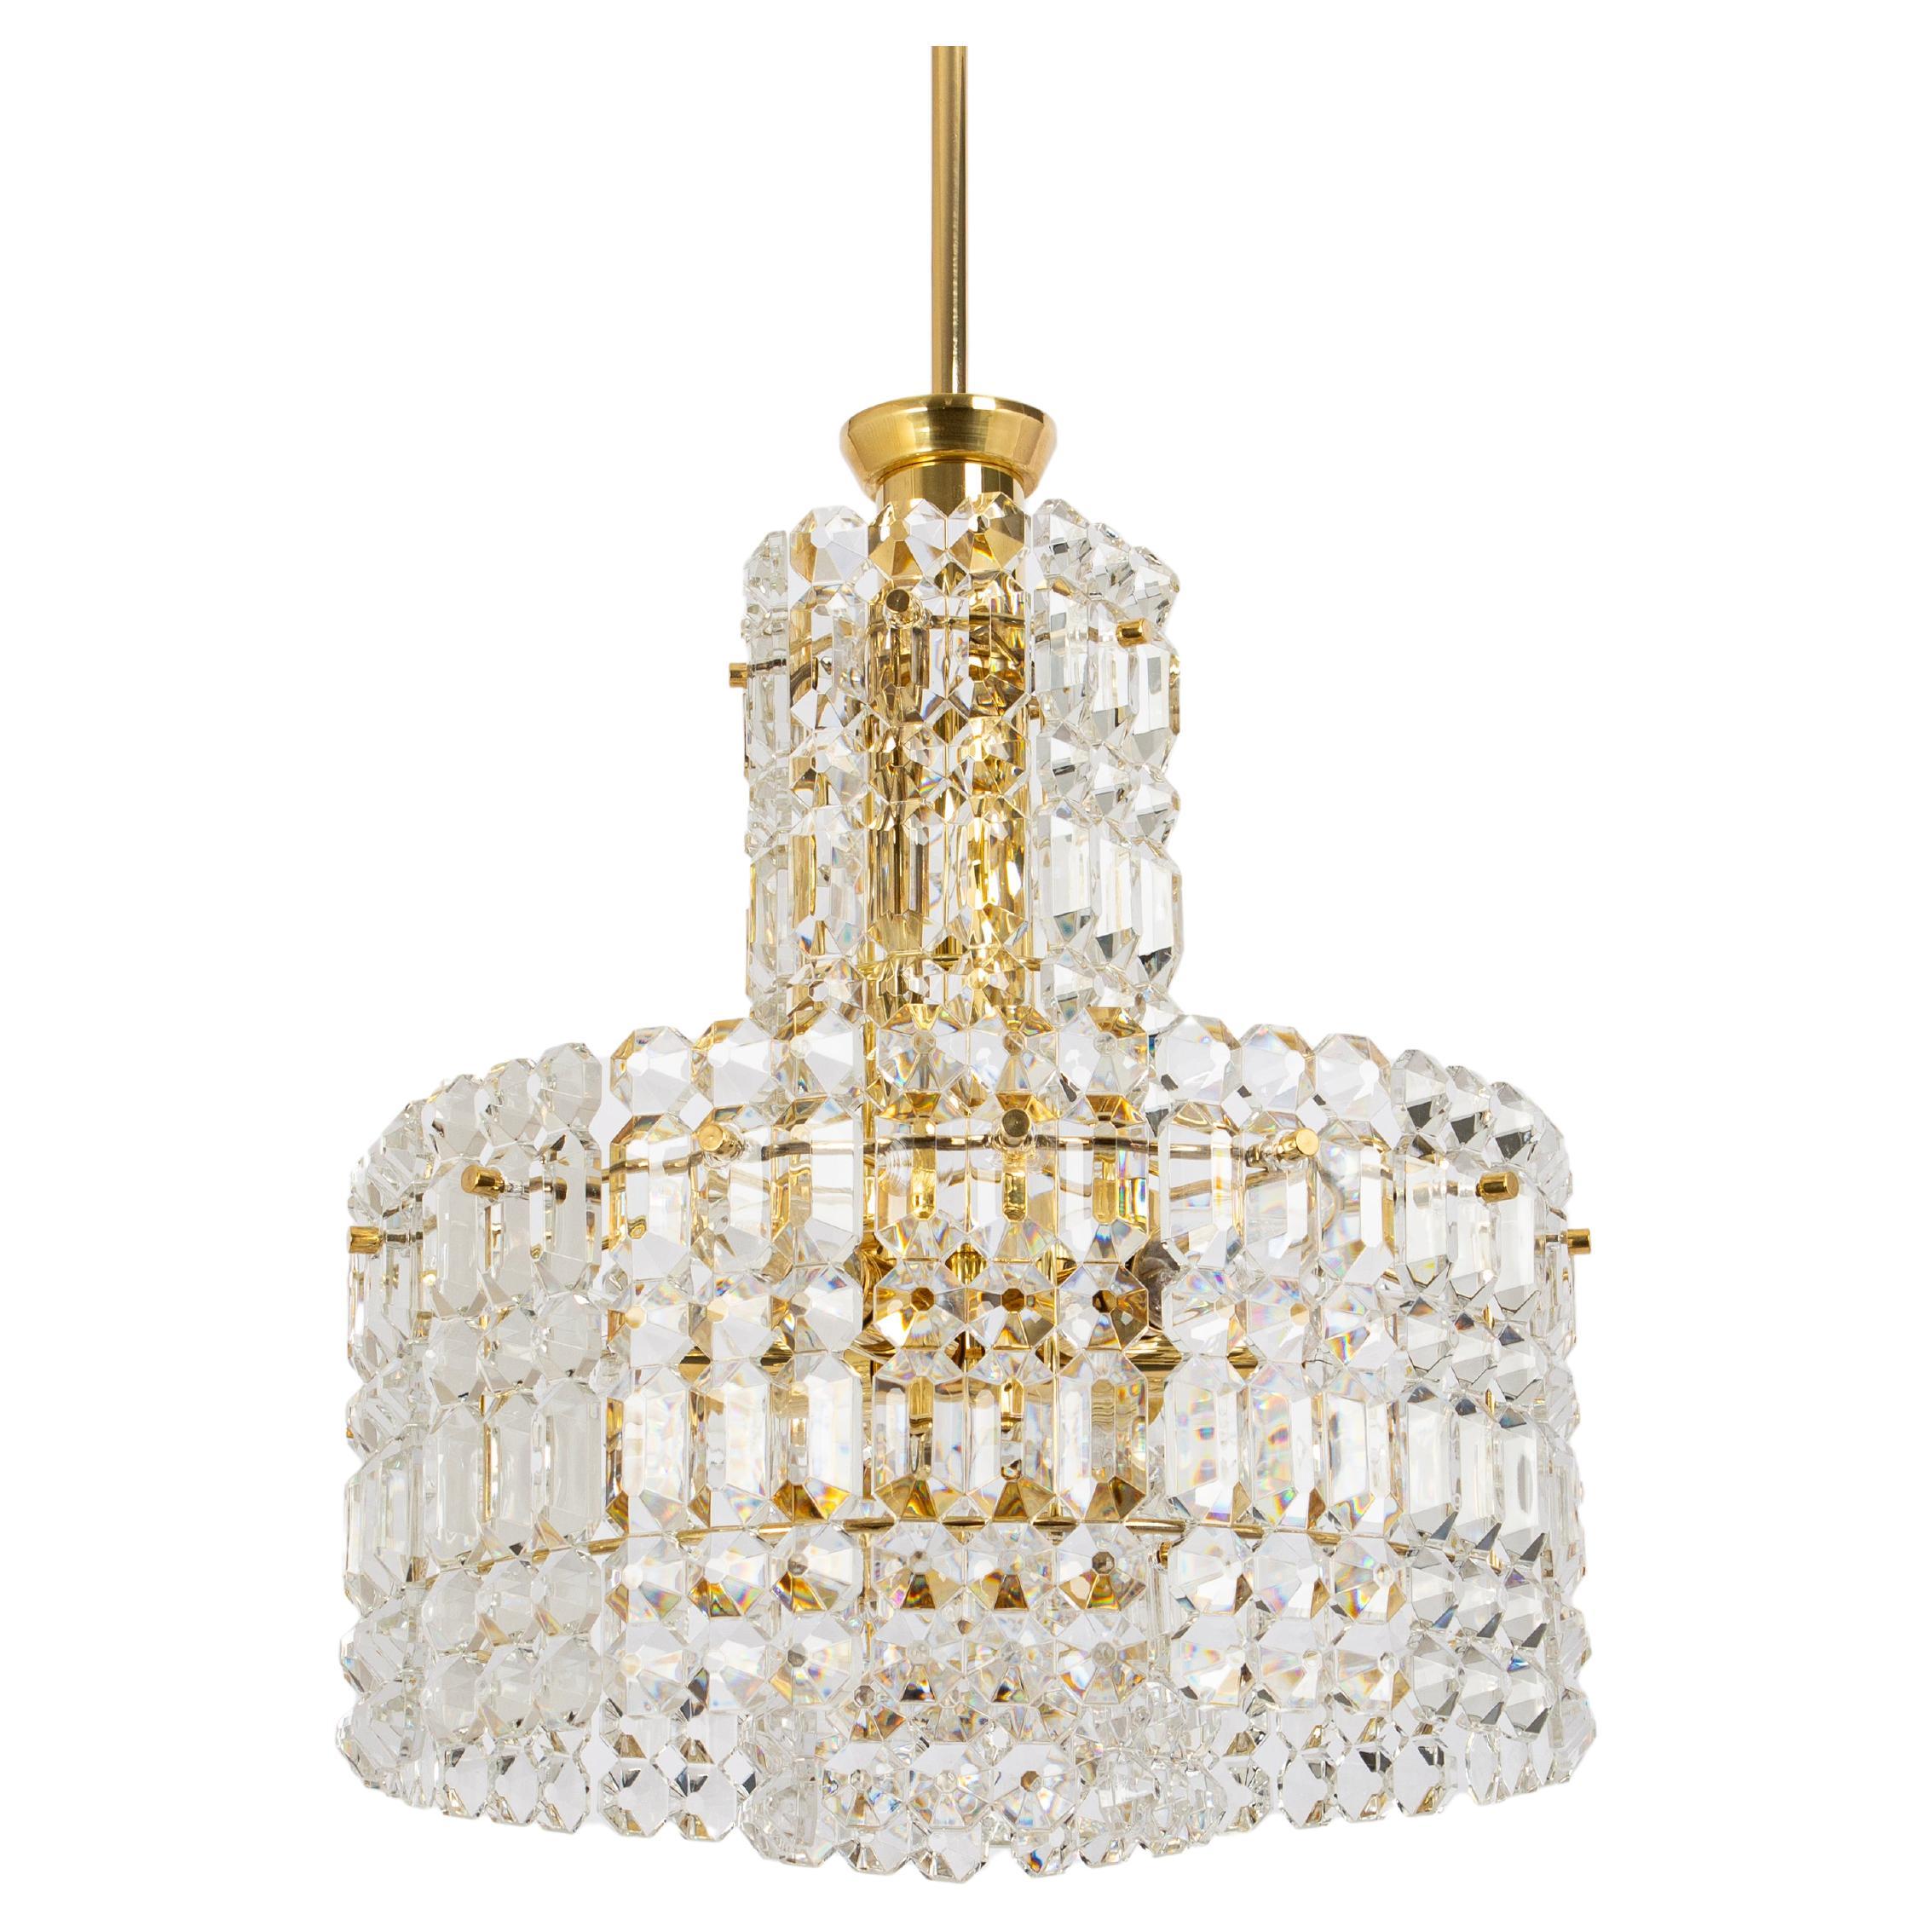 Stunning Chandelier, Brass and Crystal Glass by Kinkeldey, Germany, 1970s For Sale